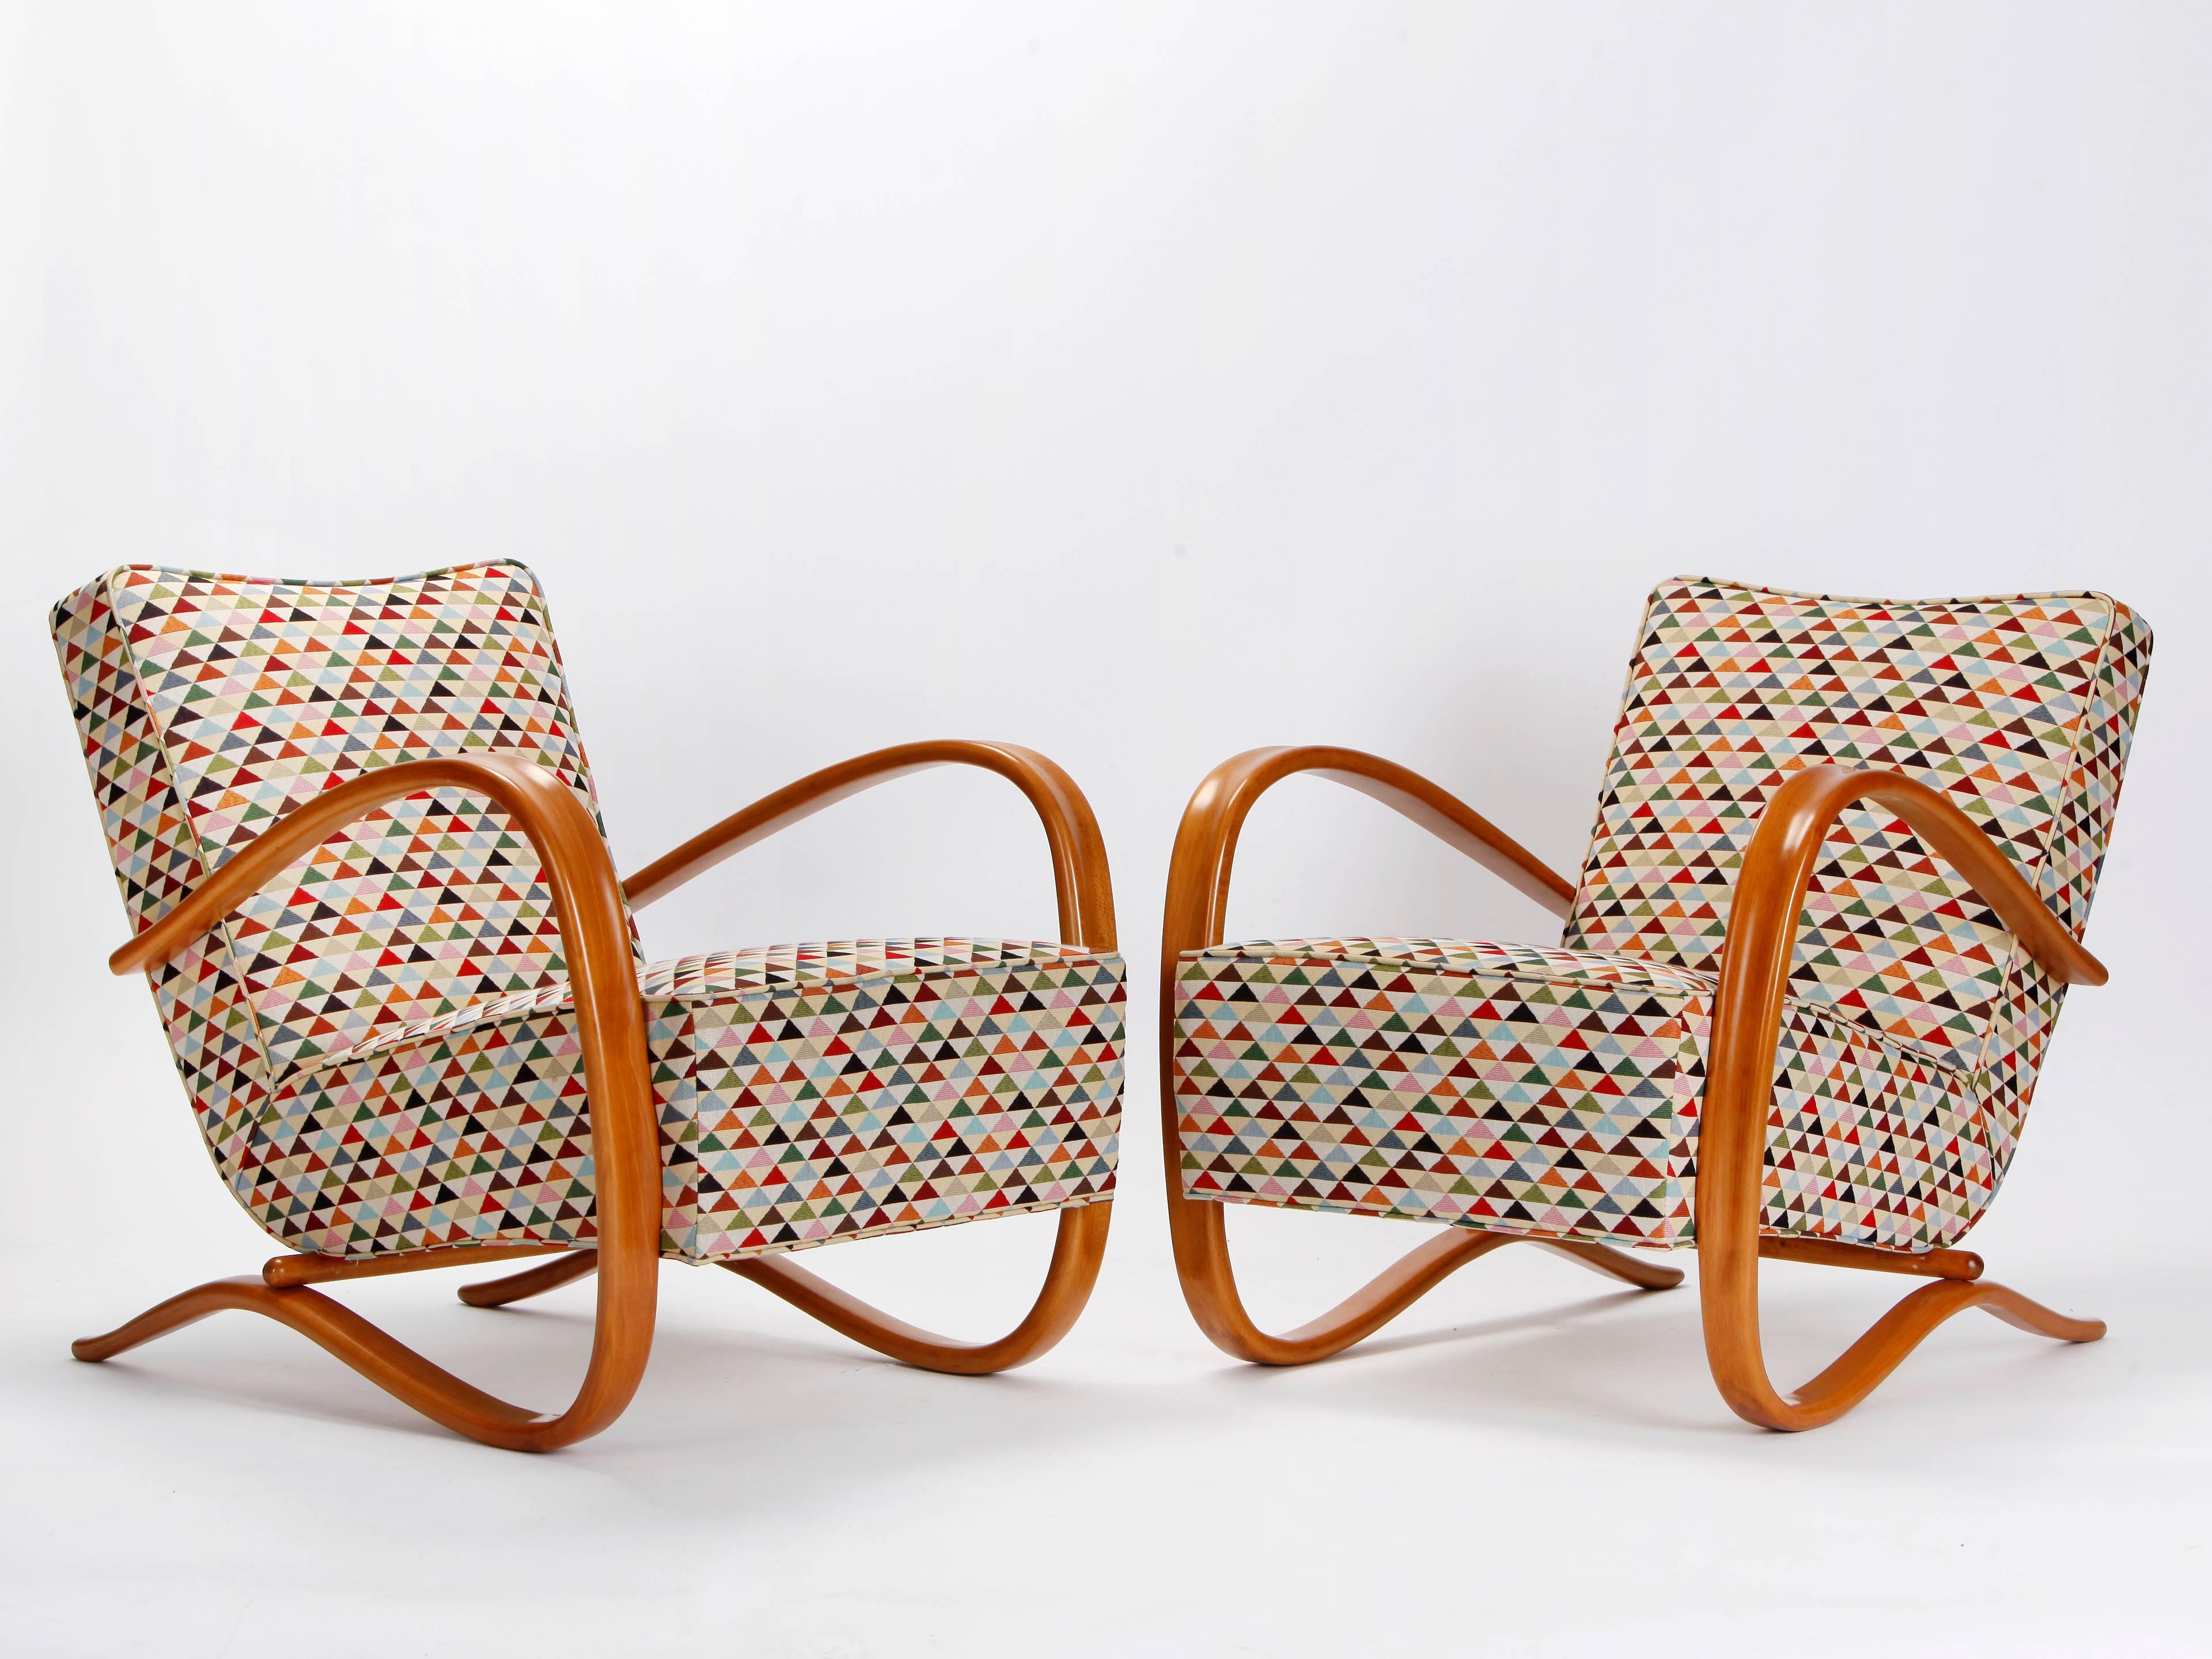 This pair of chairs has been produced in former Czechoslovakia in the 1930s.
The frames are made from beech bentwood and have been restored.
Fully reupholstered with a trendy fabric from Austria.
Tschechisches Wohndesign (Czech living design) is